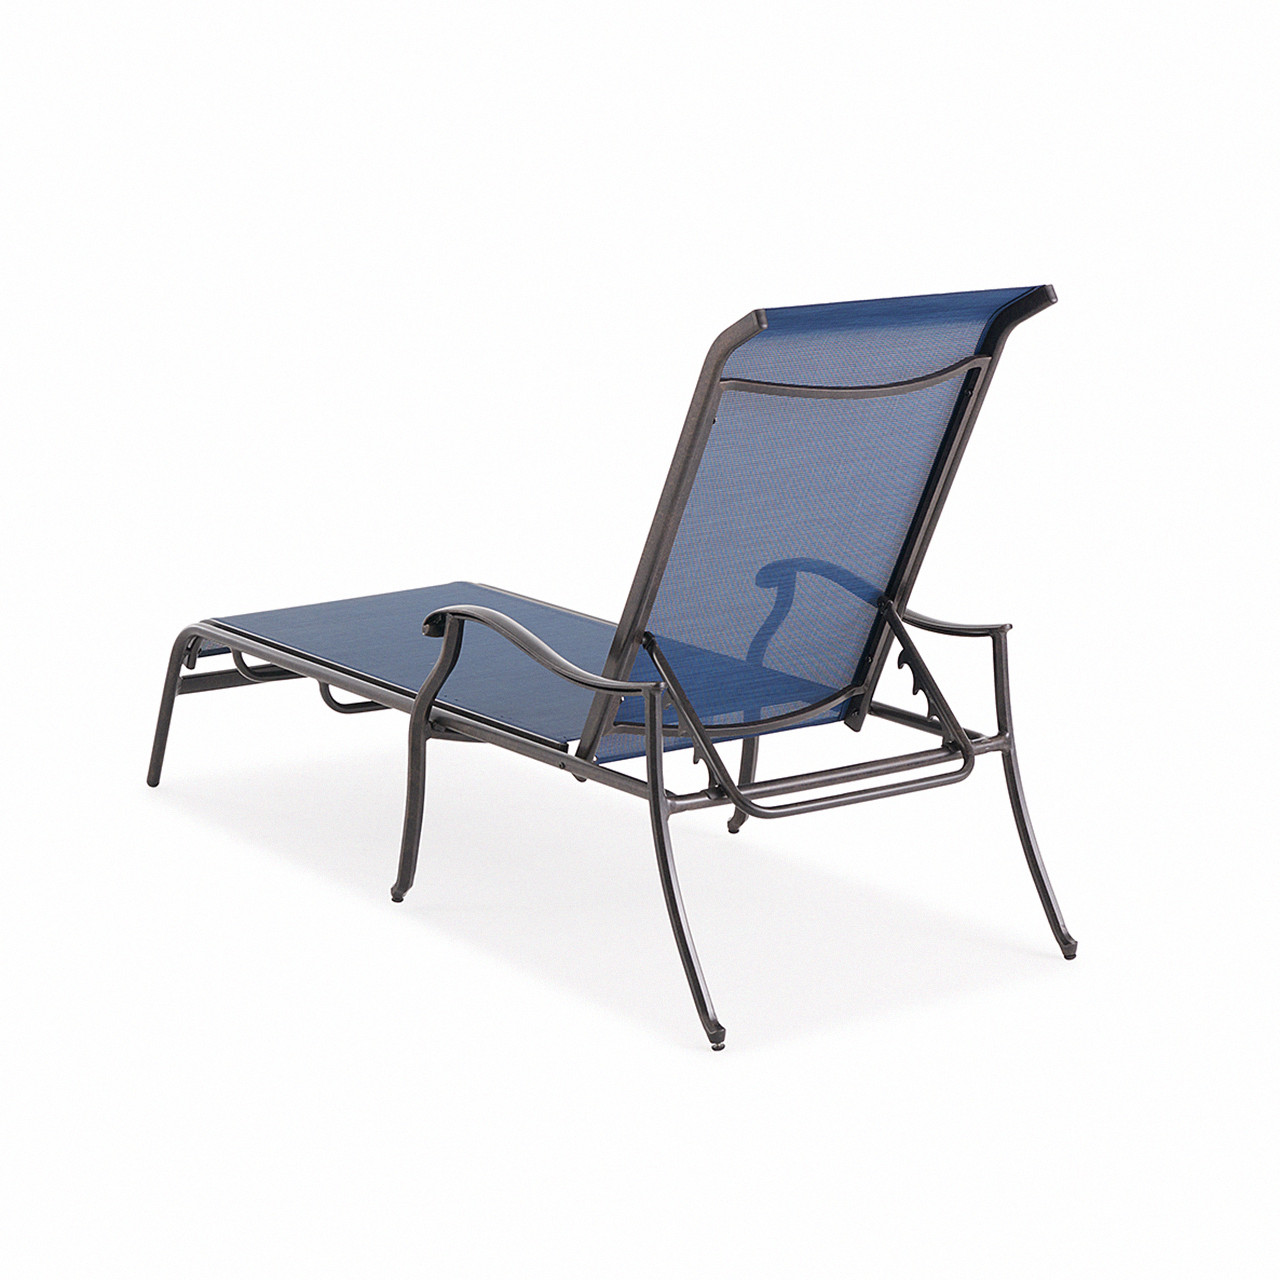 Bellagio Black Gold Aluminum with Sapphire Sling Chaise Lounge